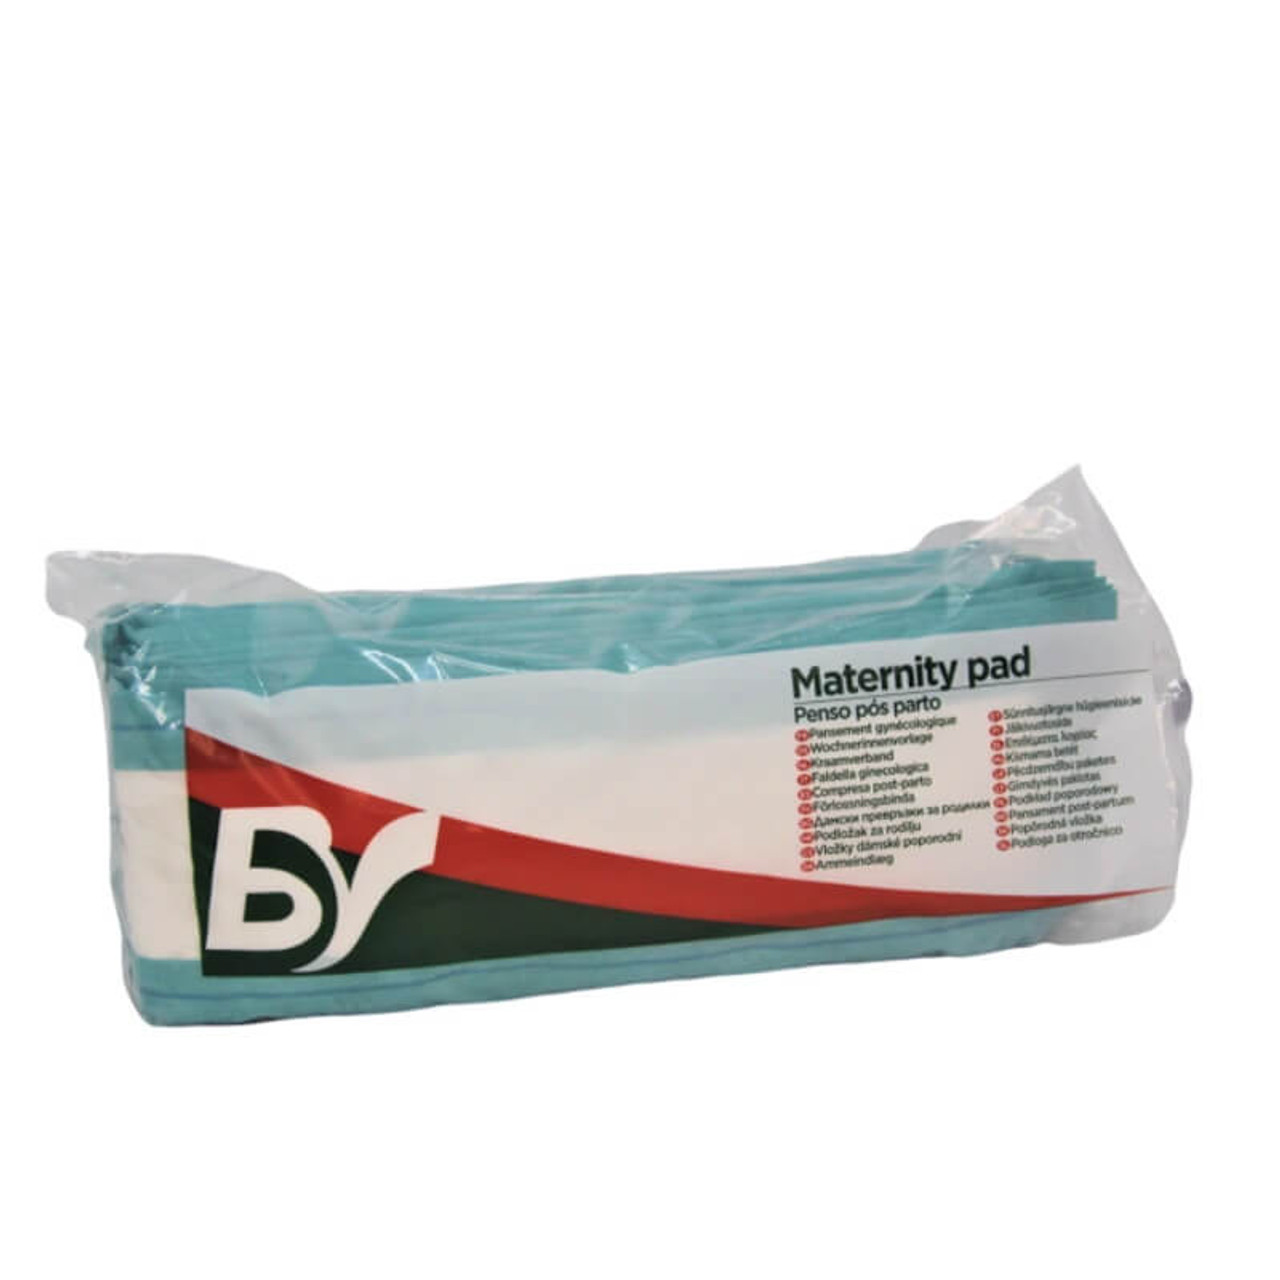 BV Maternity Pads 10 x 30cm - 10 Pack : Next Day Delivery